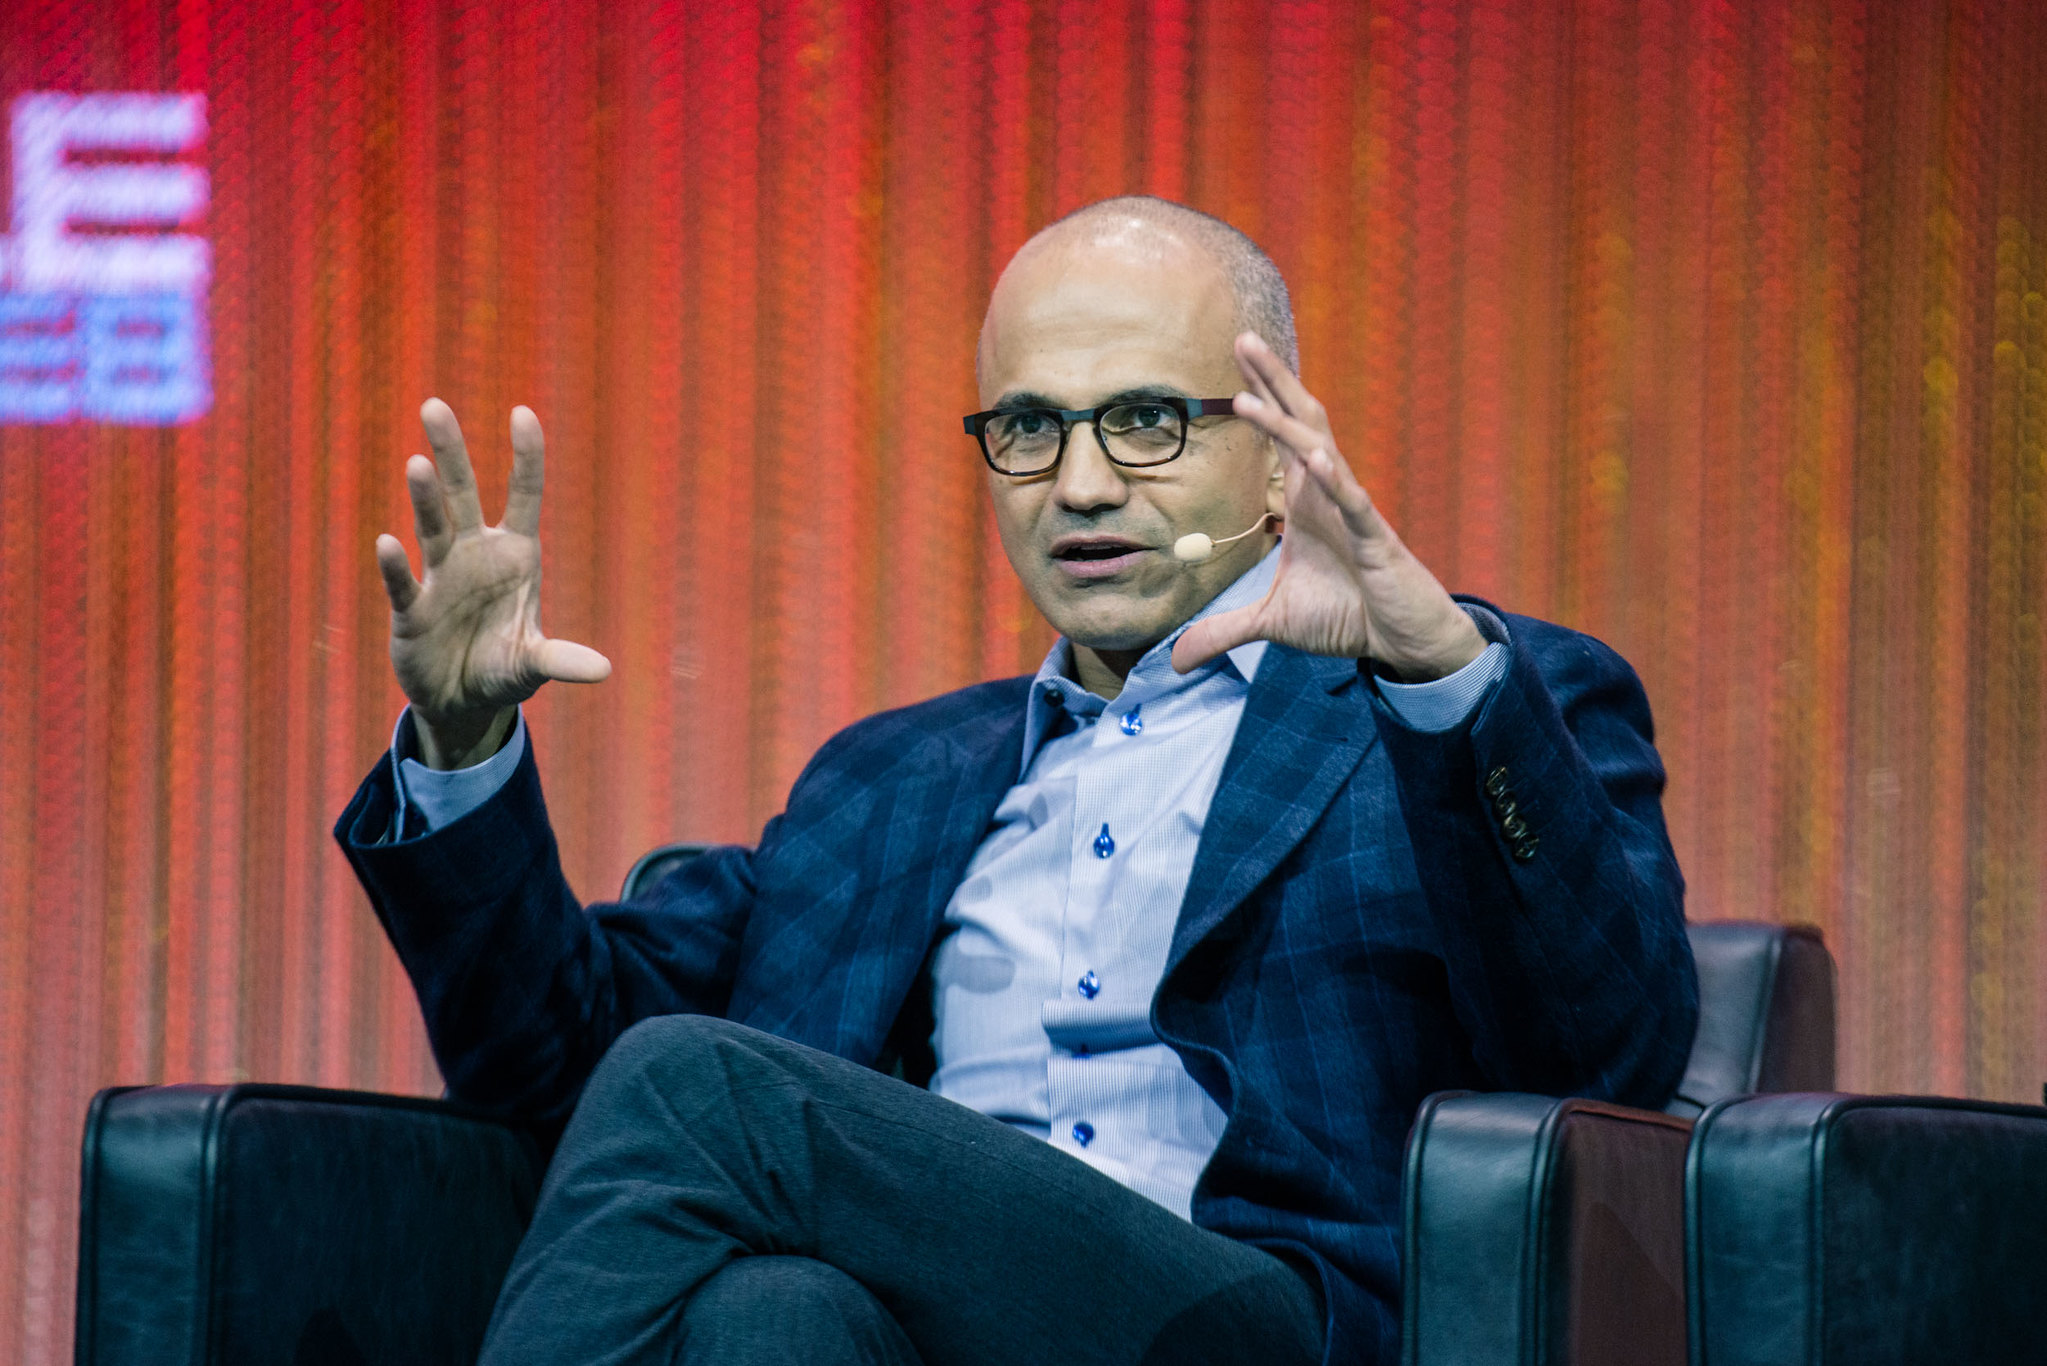 Microsoft chief urged companies and authorities to co-operate to create safe AI